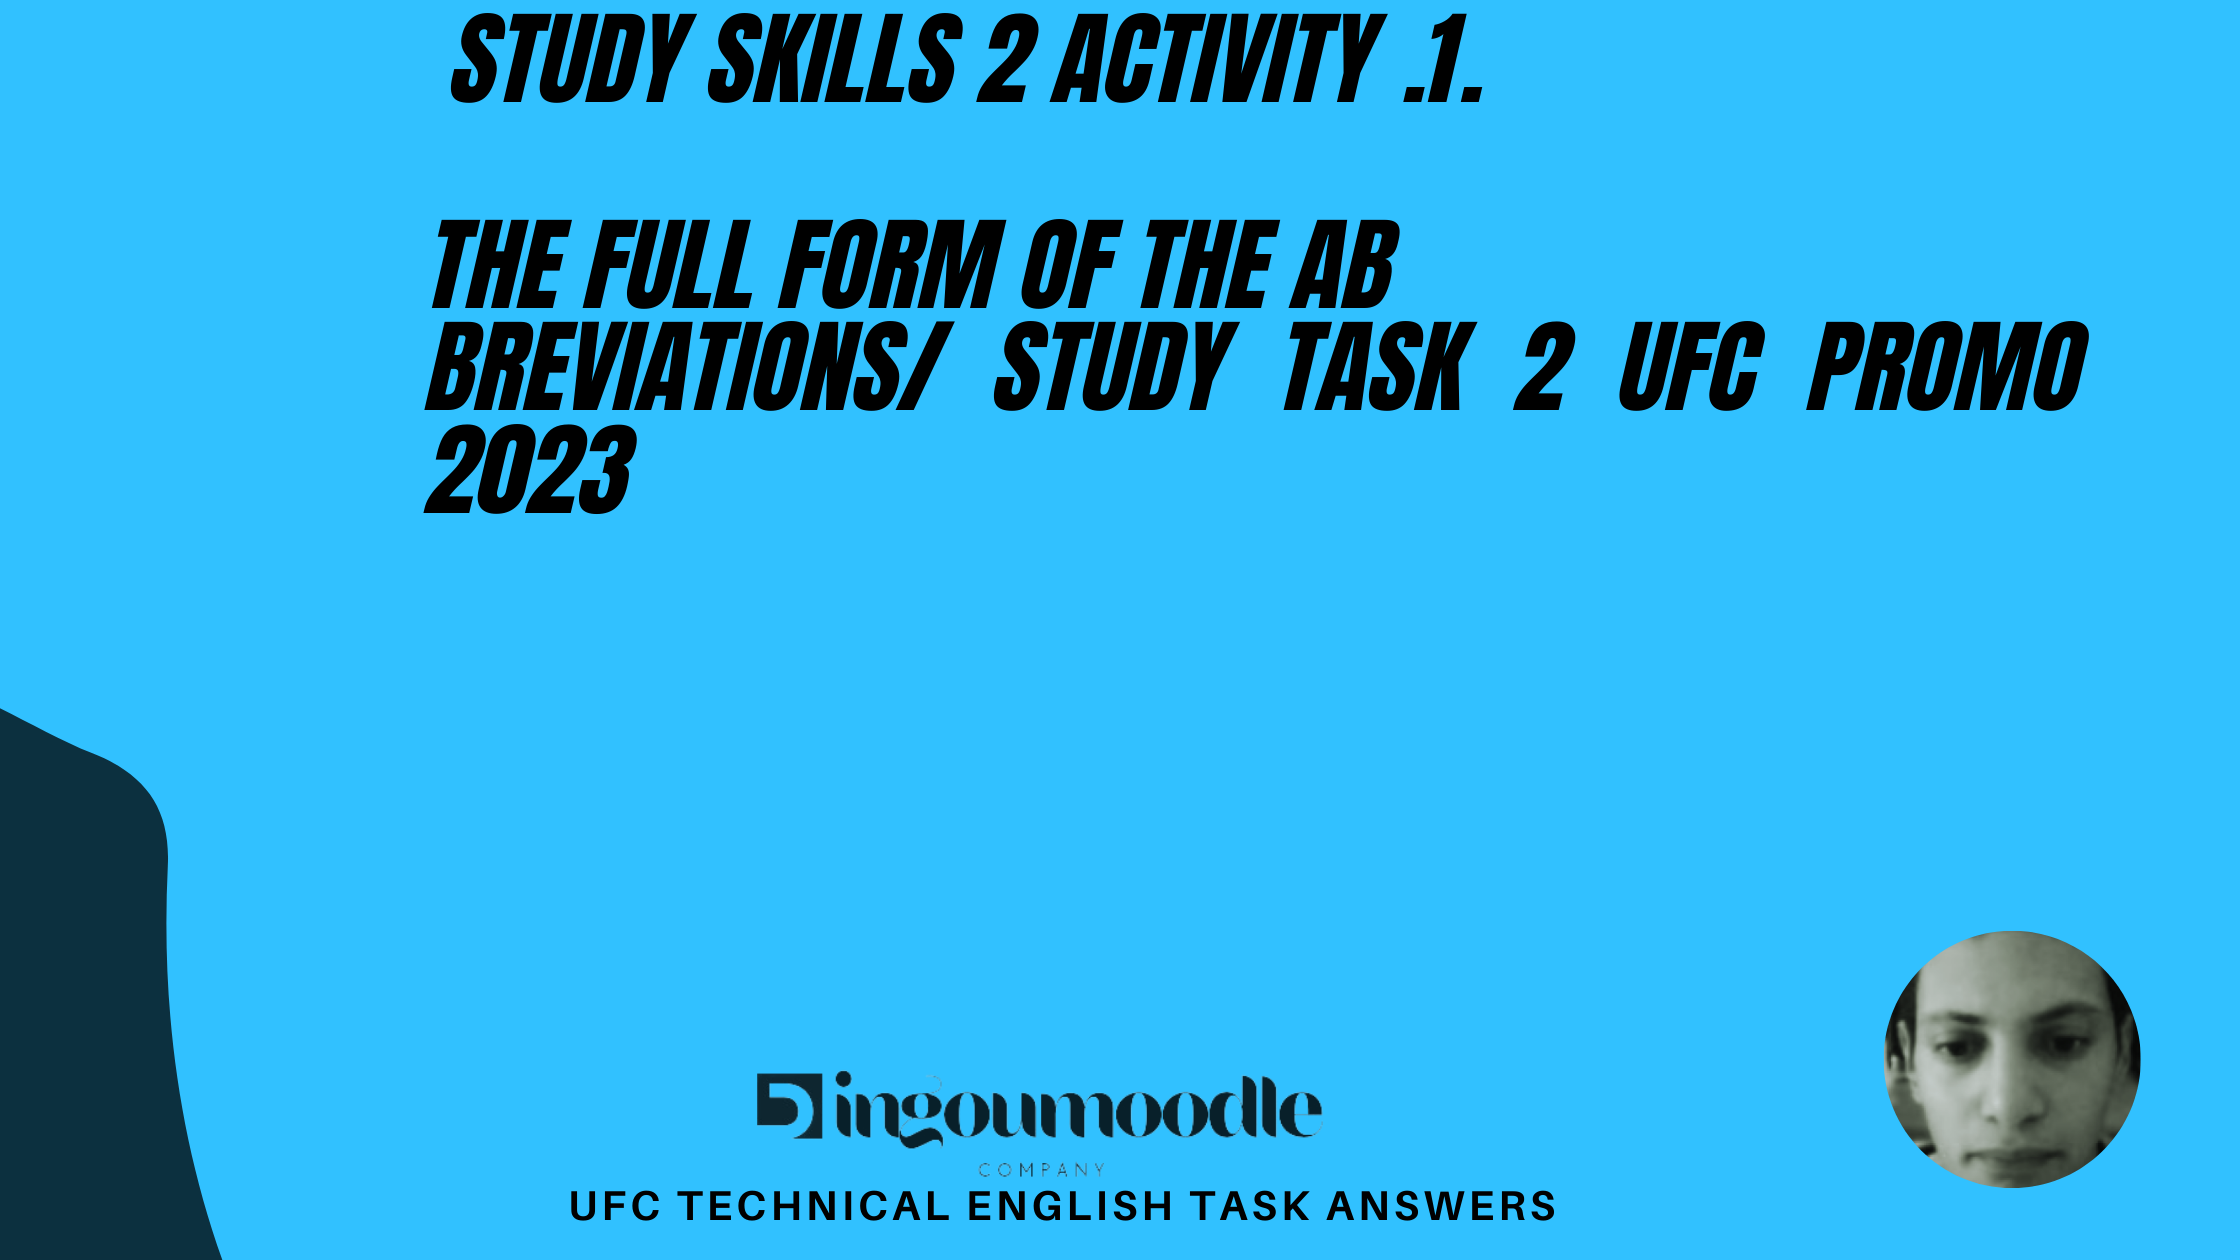 The full form of the abbreviations/ Study Task 2 ufc promo 2023